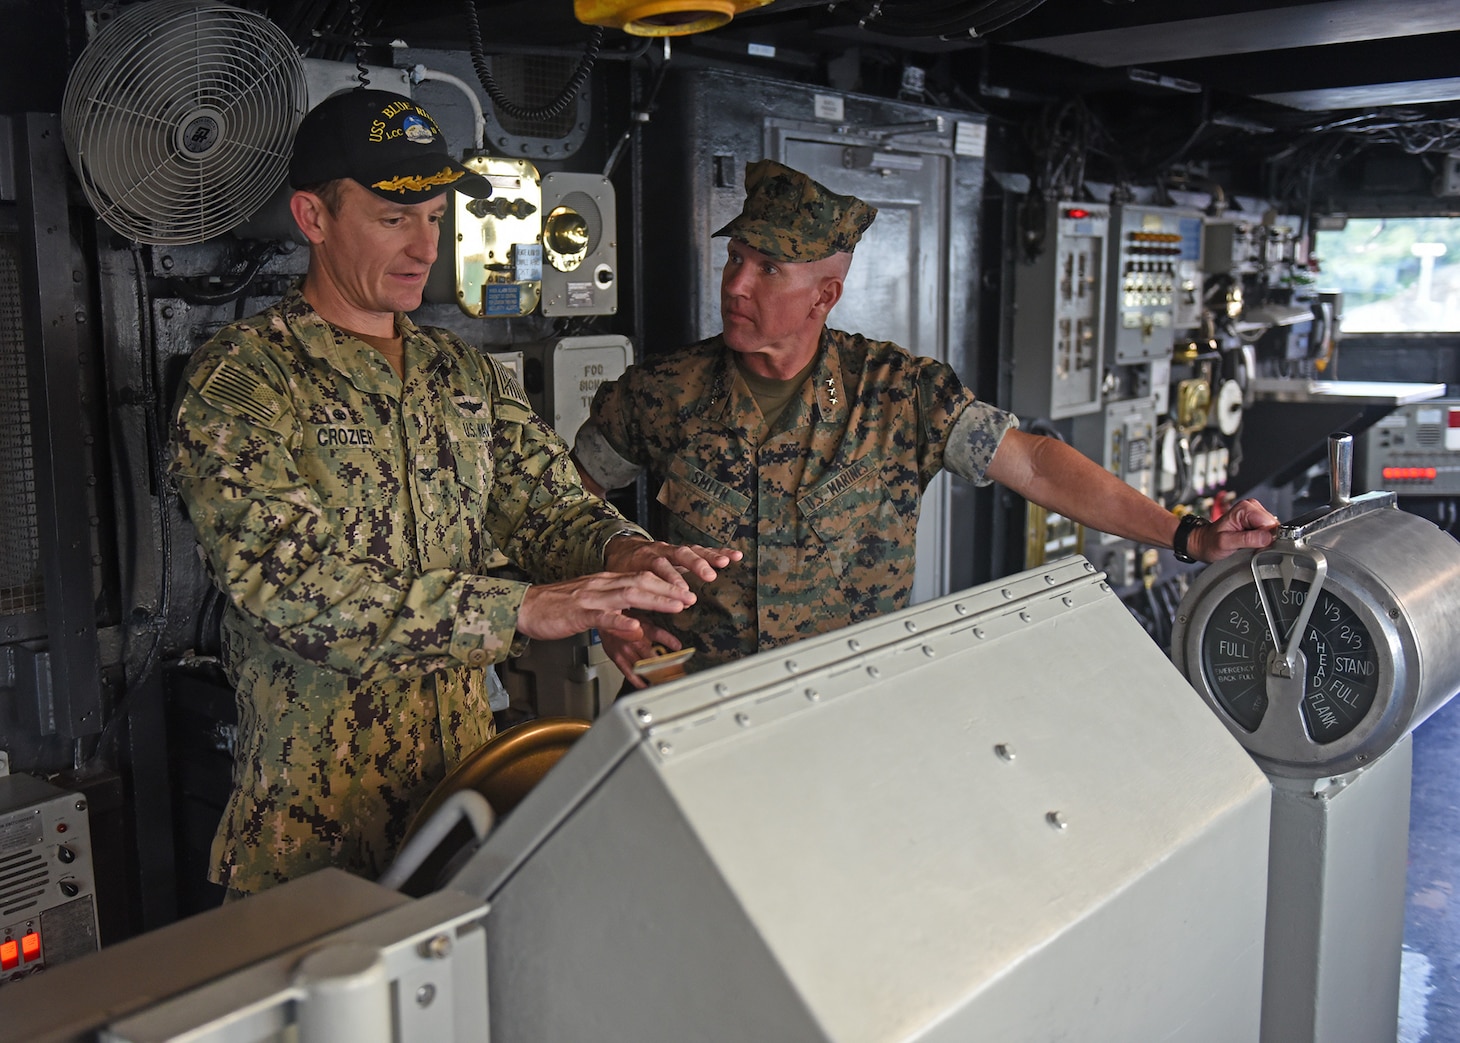 YOKOSUKA, Japan (Sept. 18, 2018) Lt. Gen. Eric M. Smith, Commanding General, III Marine Expeditionary Force, tours 7th Fleet Flagship USS Blue Ridge (LCC 19) while the ship is moored at Fleet Activities Yokosuka, Sep. 18. Lt. Gen. Eric M. Smith, who took command in August, met with USS Blue Ridge commanding officer, Capt. Brett E. Crozier, to gain a better understanding of fleet operations and build relationships with senior leadership.